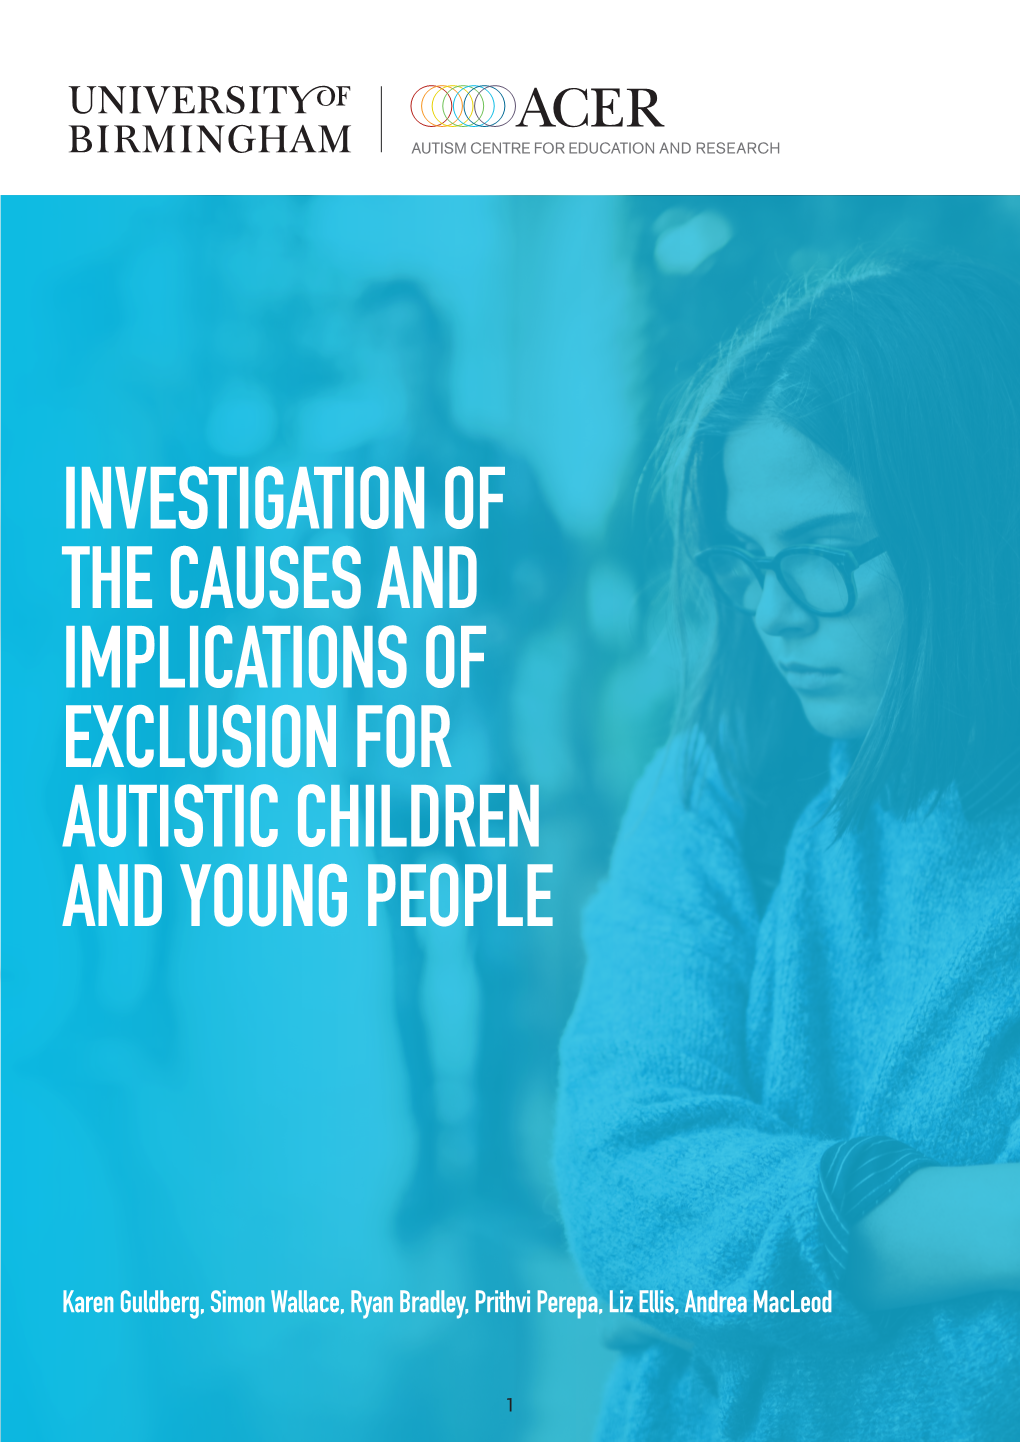 Investigation of the Causes and Implications of Exclusion for Autistic Children and Young People